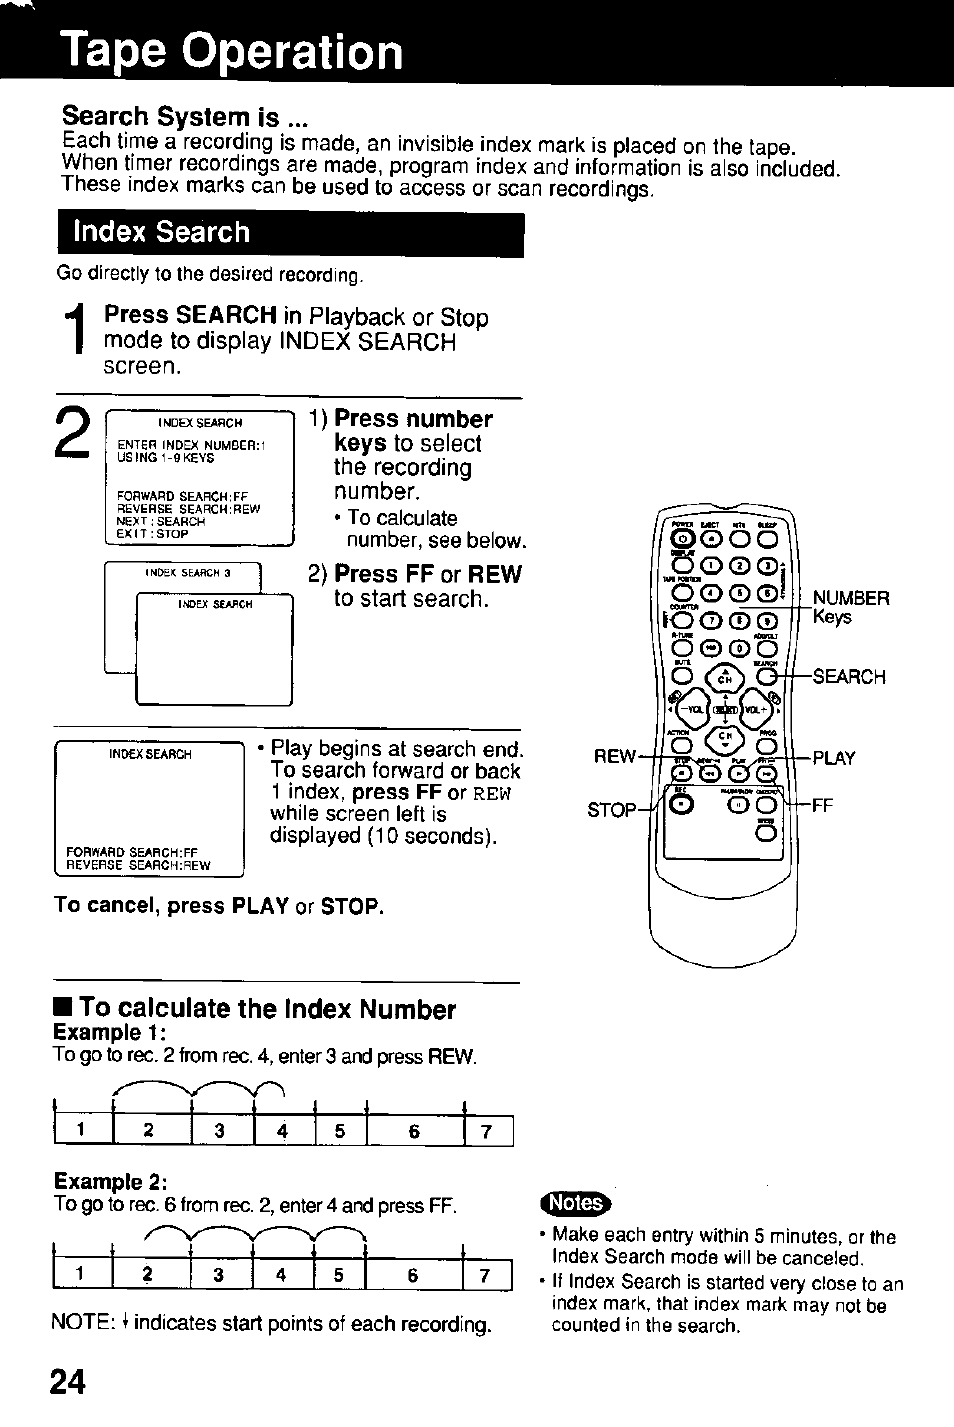 Tape operation, To cancel, press play or stop, Example 2 | Search system is, Index search | Panasonic Combinatin VCR AG-513E User Manual | Page 24 / 40